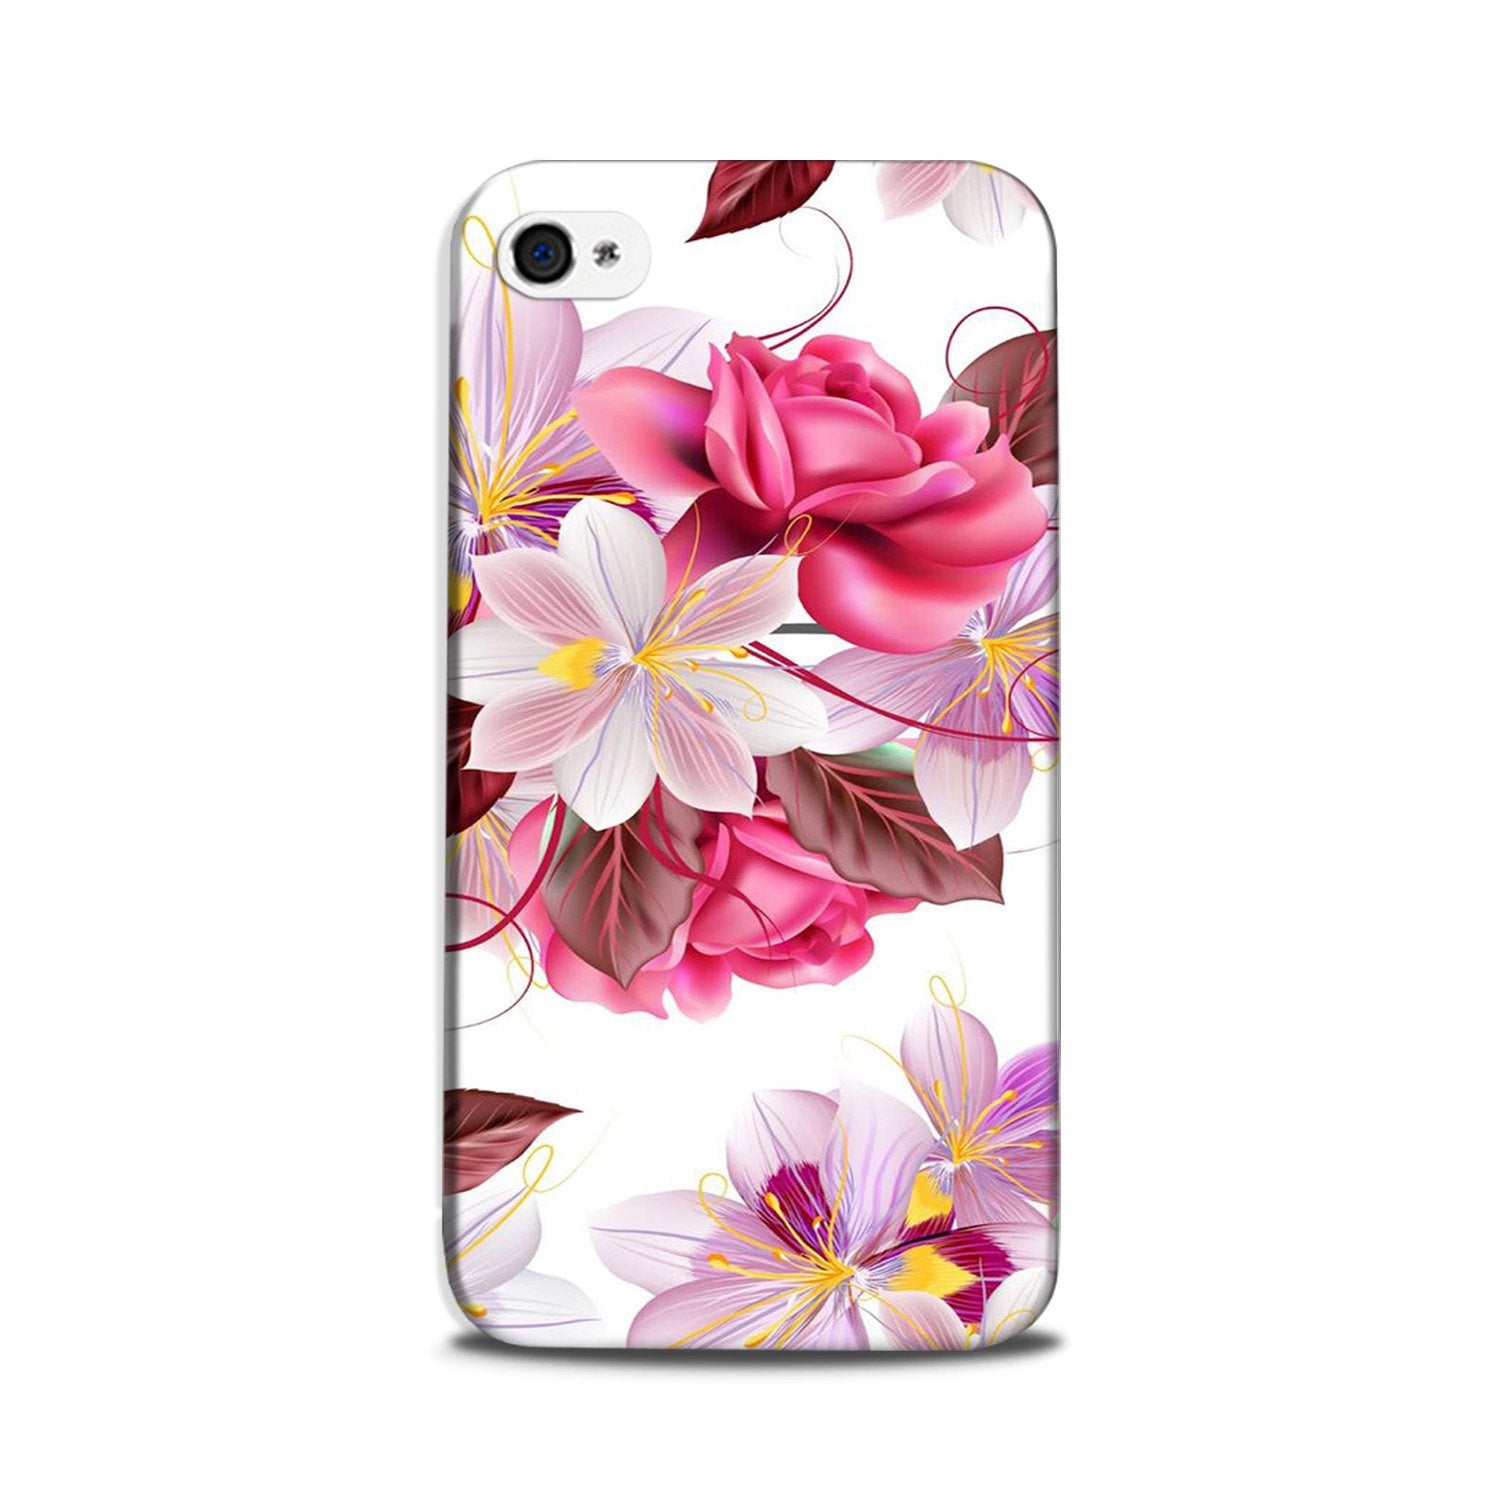 Beautiful flowers Case for iPhone 5/ 5s